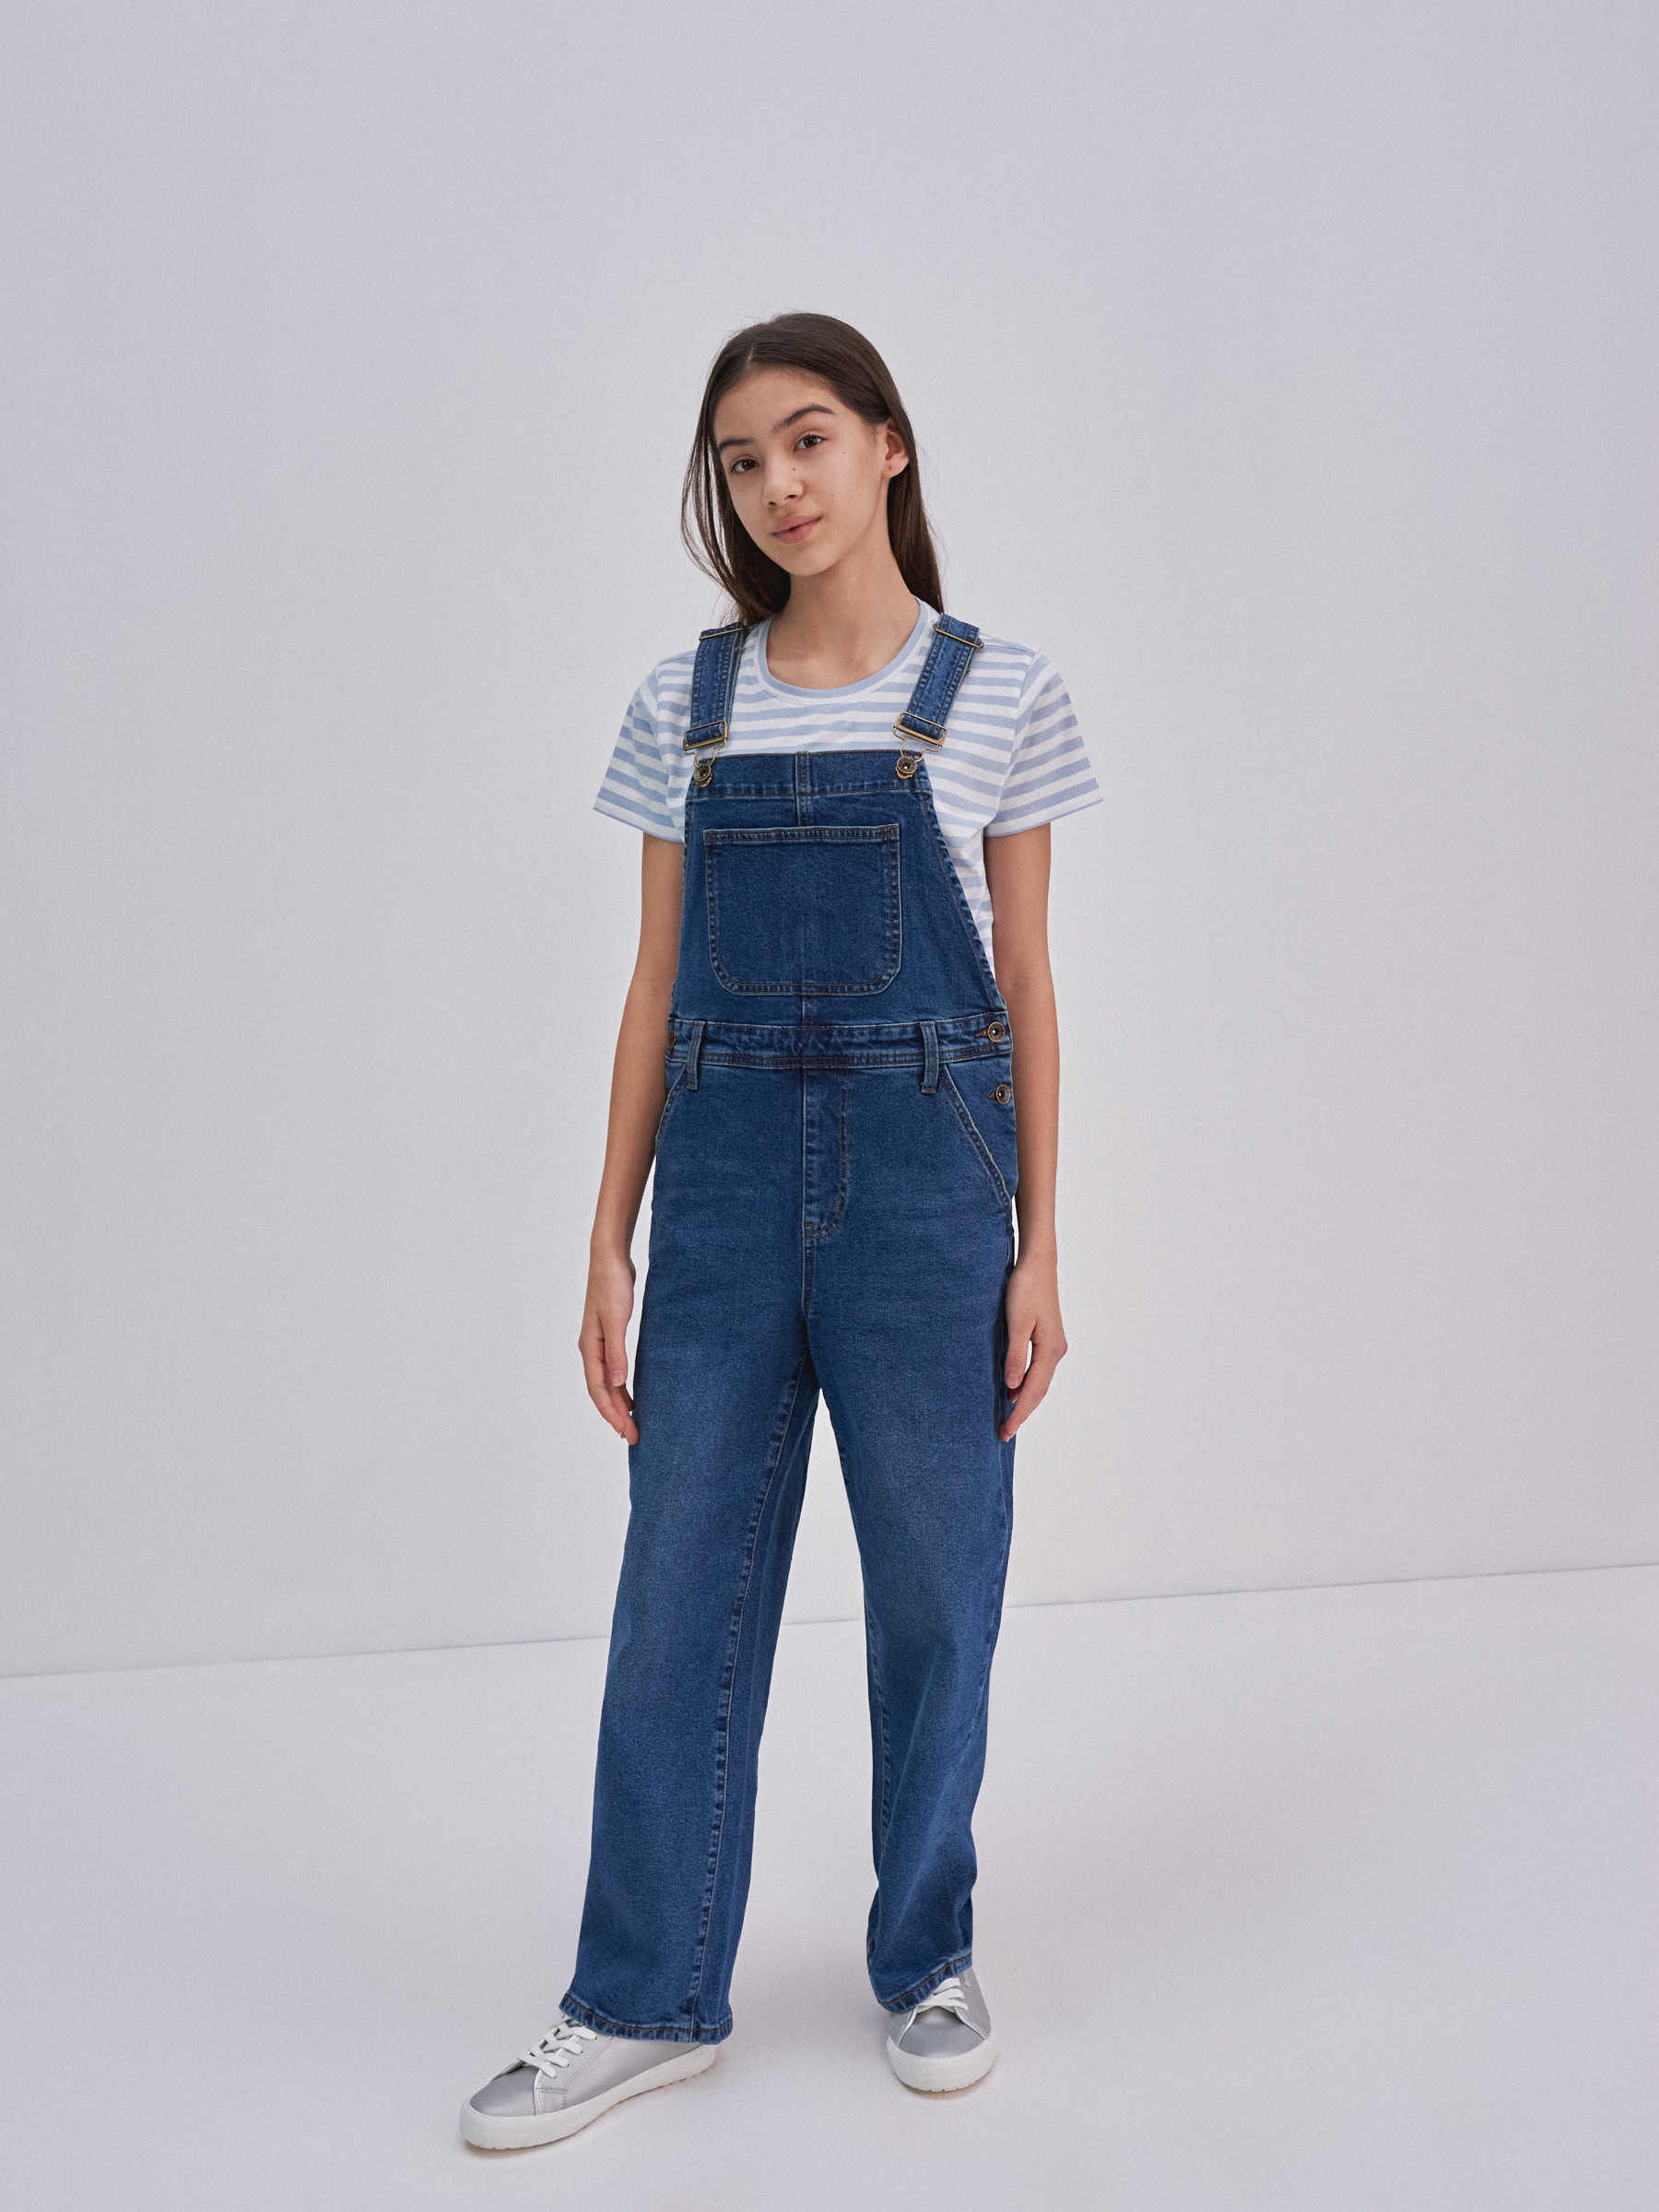 Big Star Woman's Overall Trousers 190031  Denim